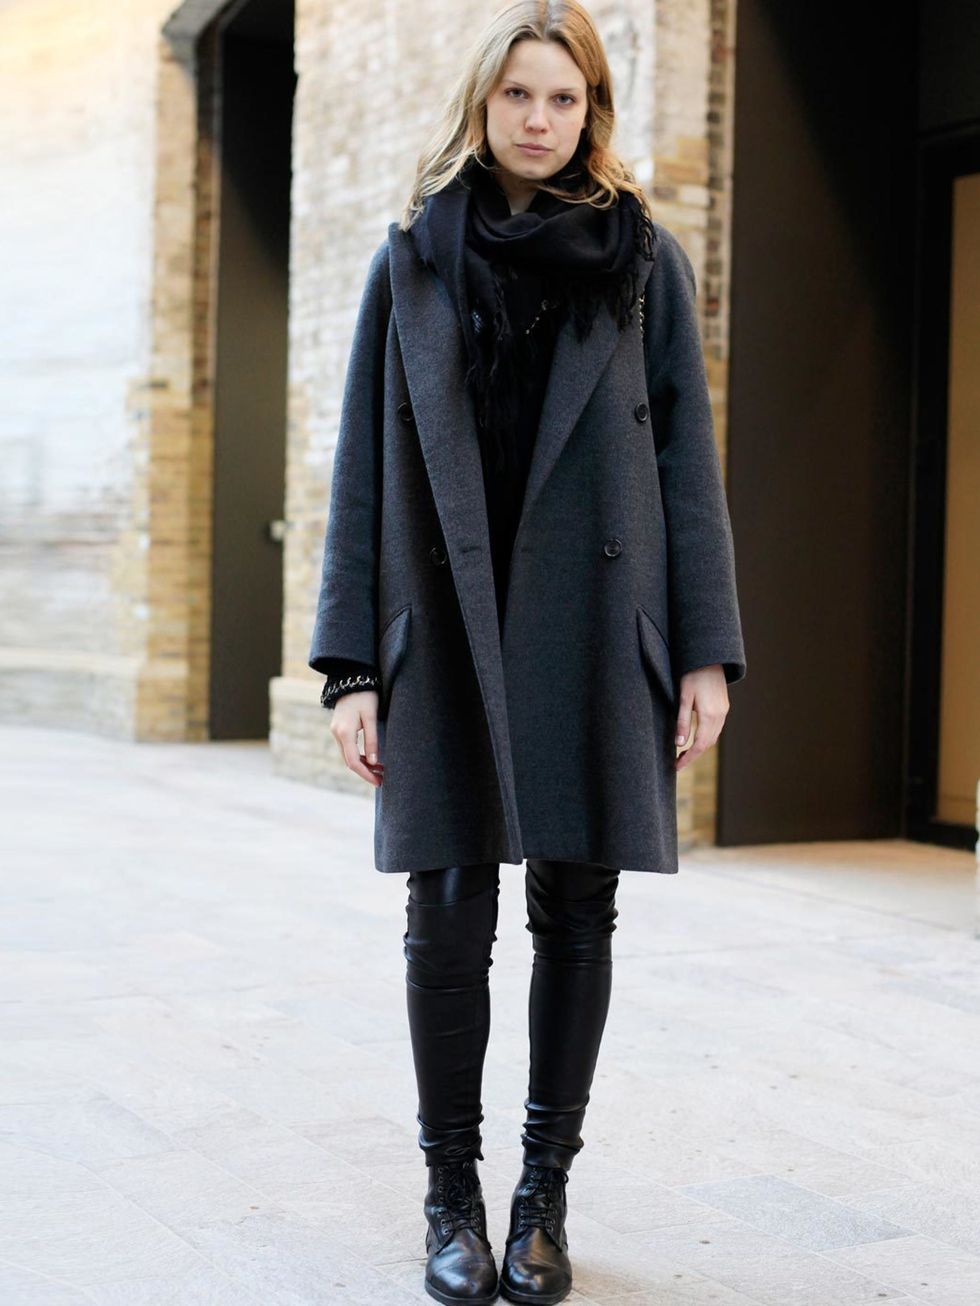 <p>Marilyn, 26, Chloe coat, Risto trousers, vintage boots from Paris, Chanel bag.</p>